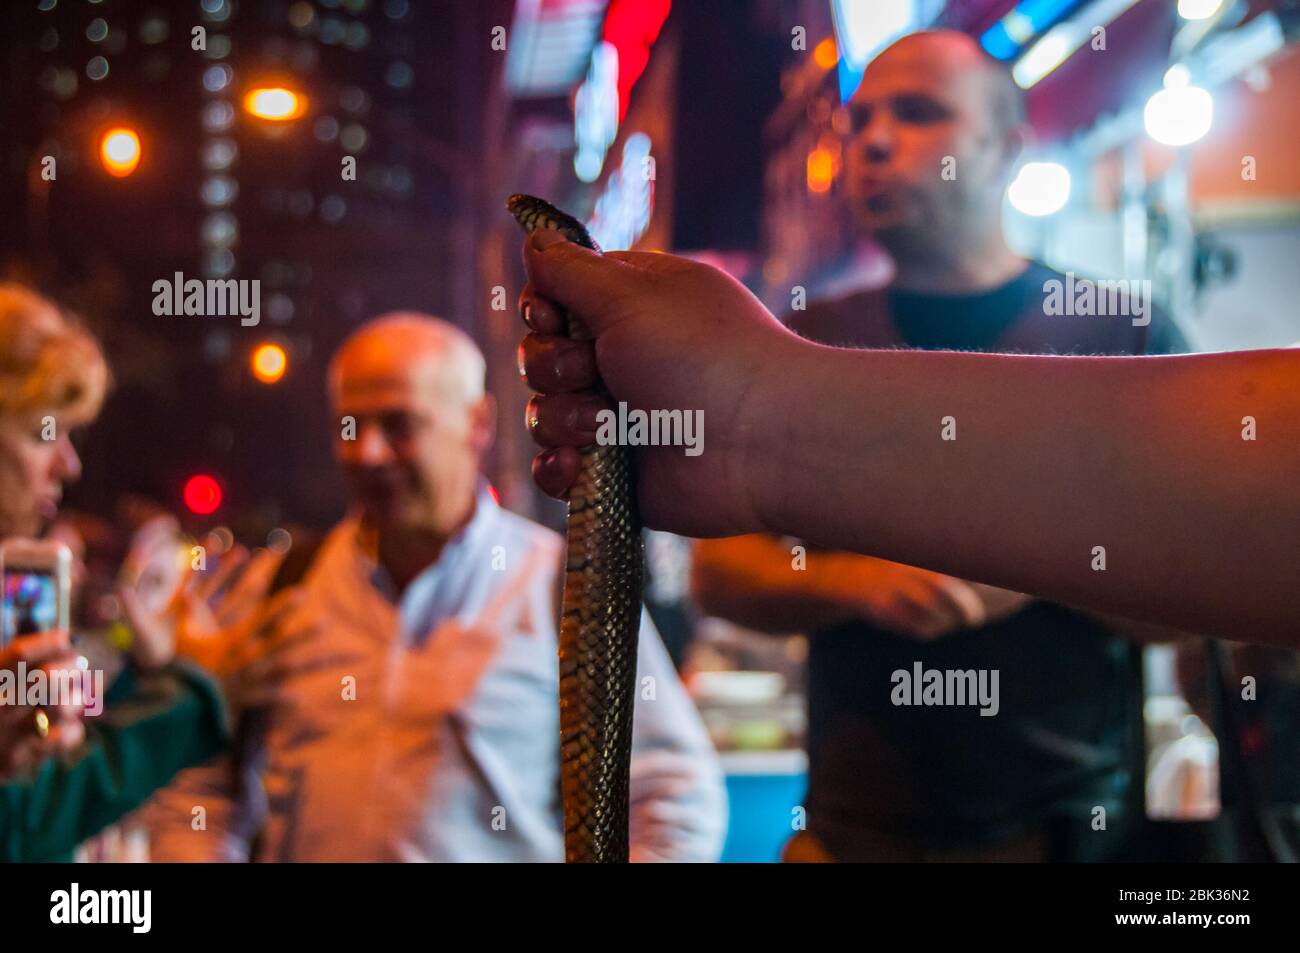 Meet and greet with a watersnake on the UnTour Night Eats Tour outside a restaurant on Shouning Road in Shanghai Stock Photo